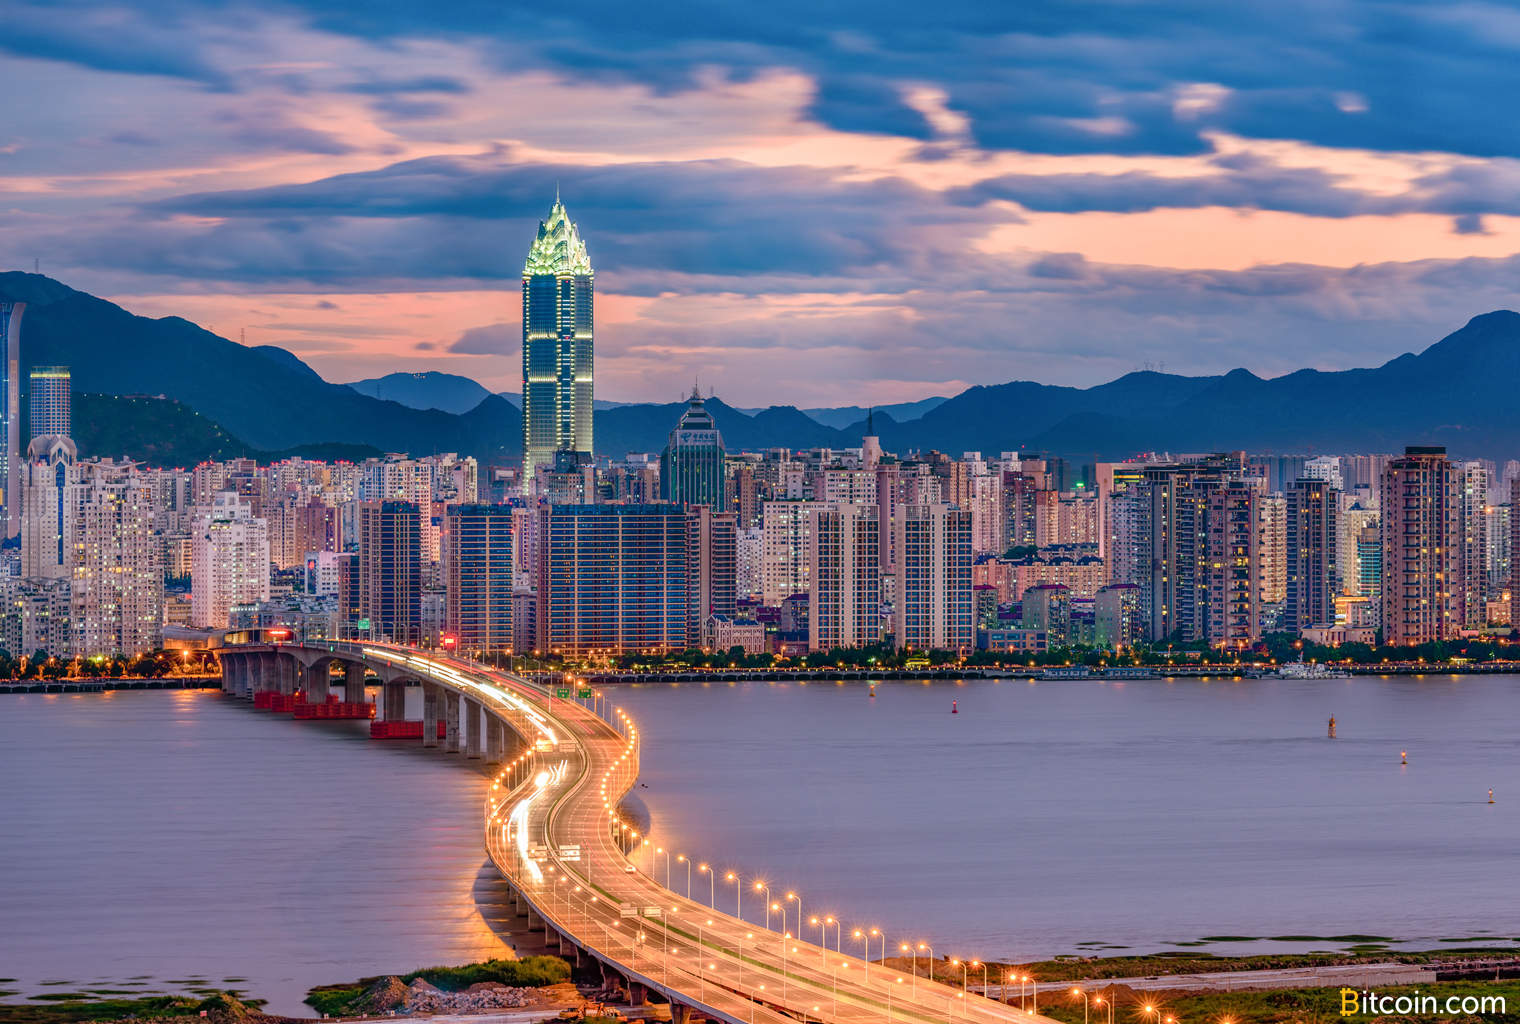 Wenzhou Investors From China Bolster the Idea of a 'Blockchain Village'